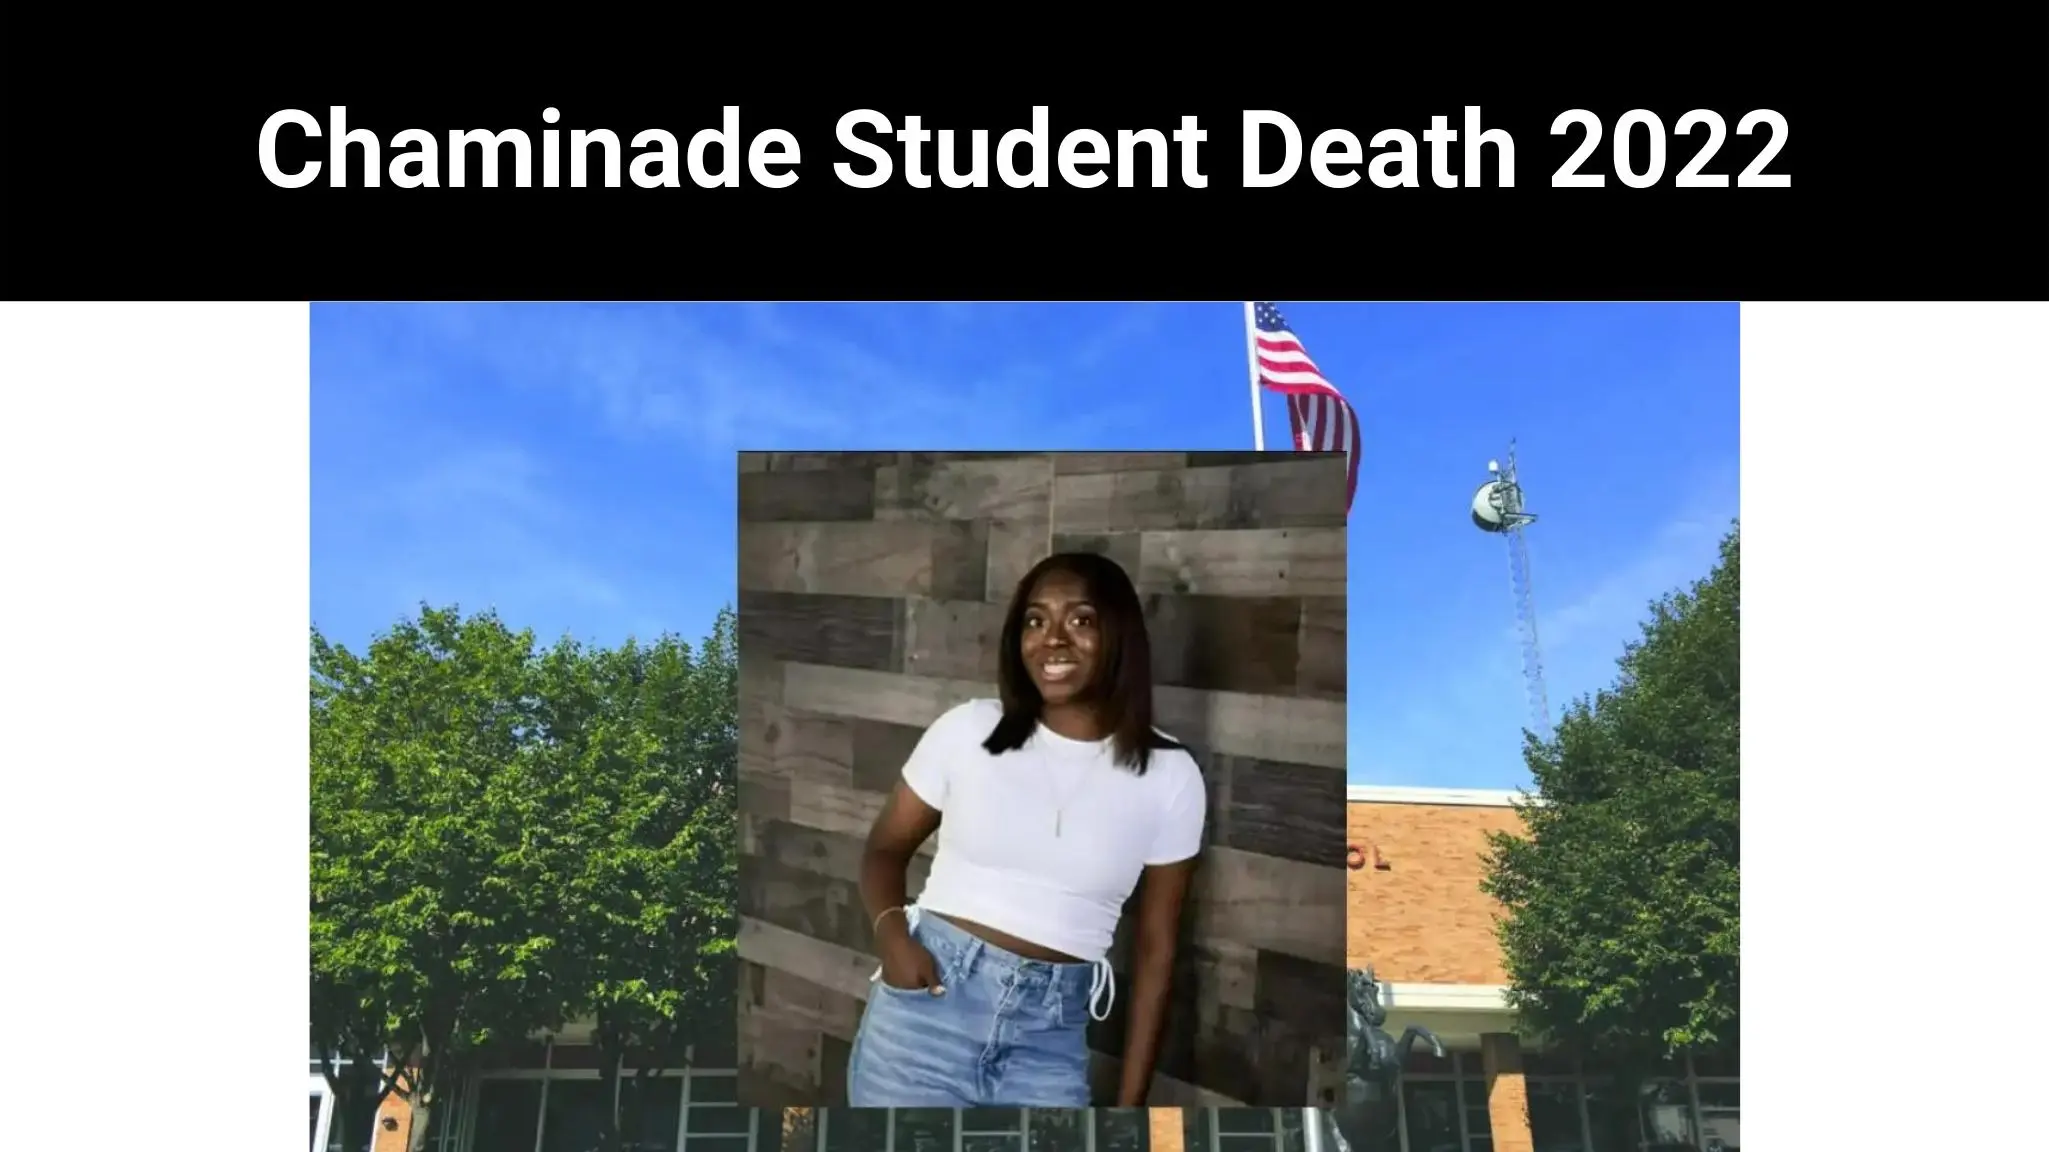 Chaminade Student Death 2022